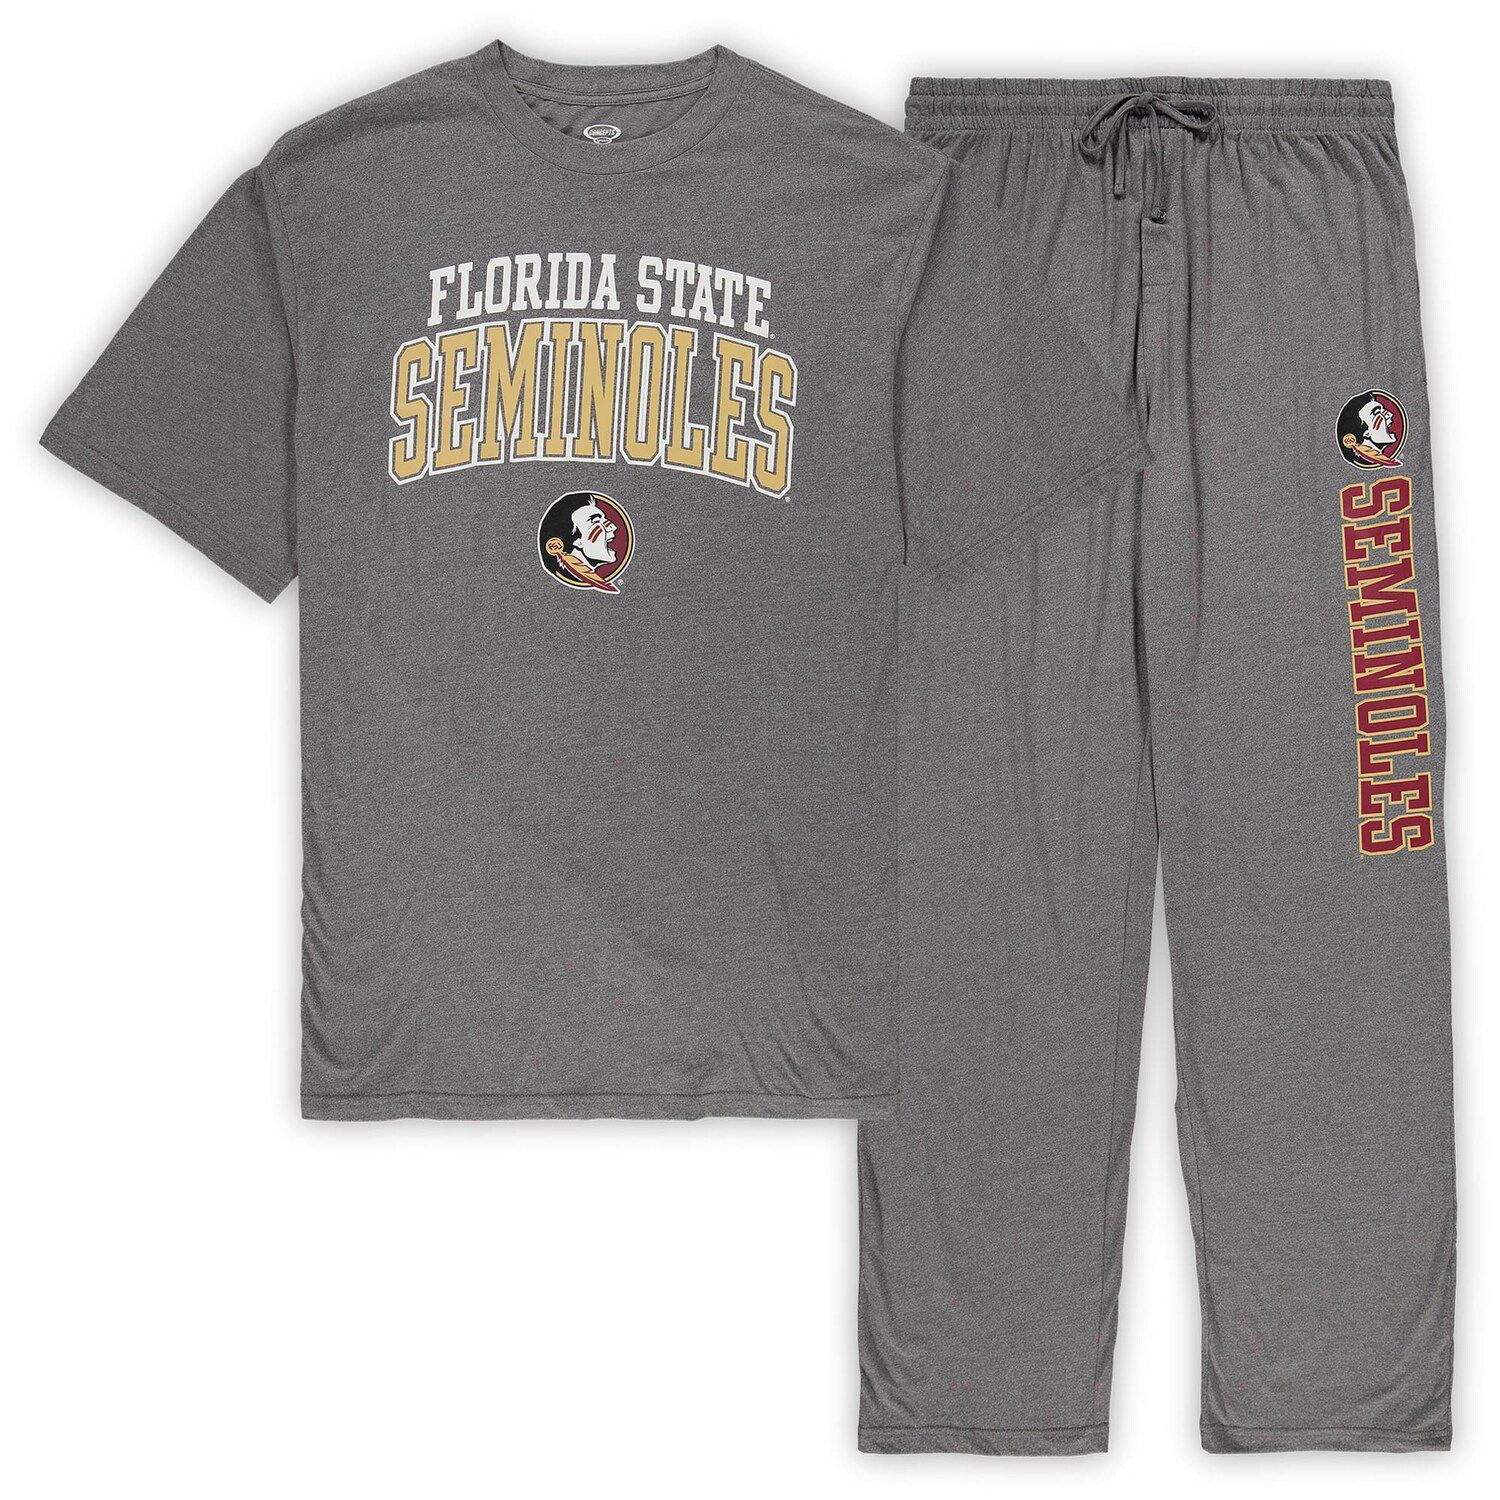 Image for Unbranded Men's Concepts Sport Charcoal Florida State Seminoles Big & Tall T-Shirt & Pants Sleep Set at Kohl's.